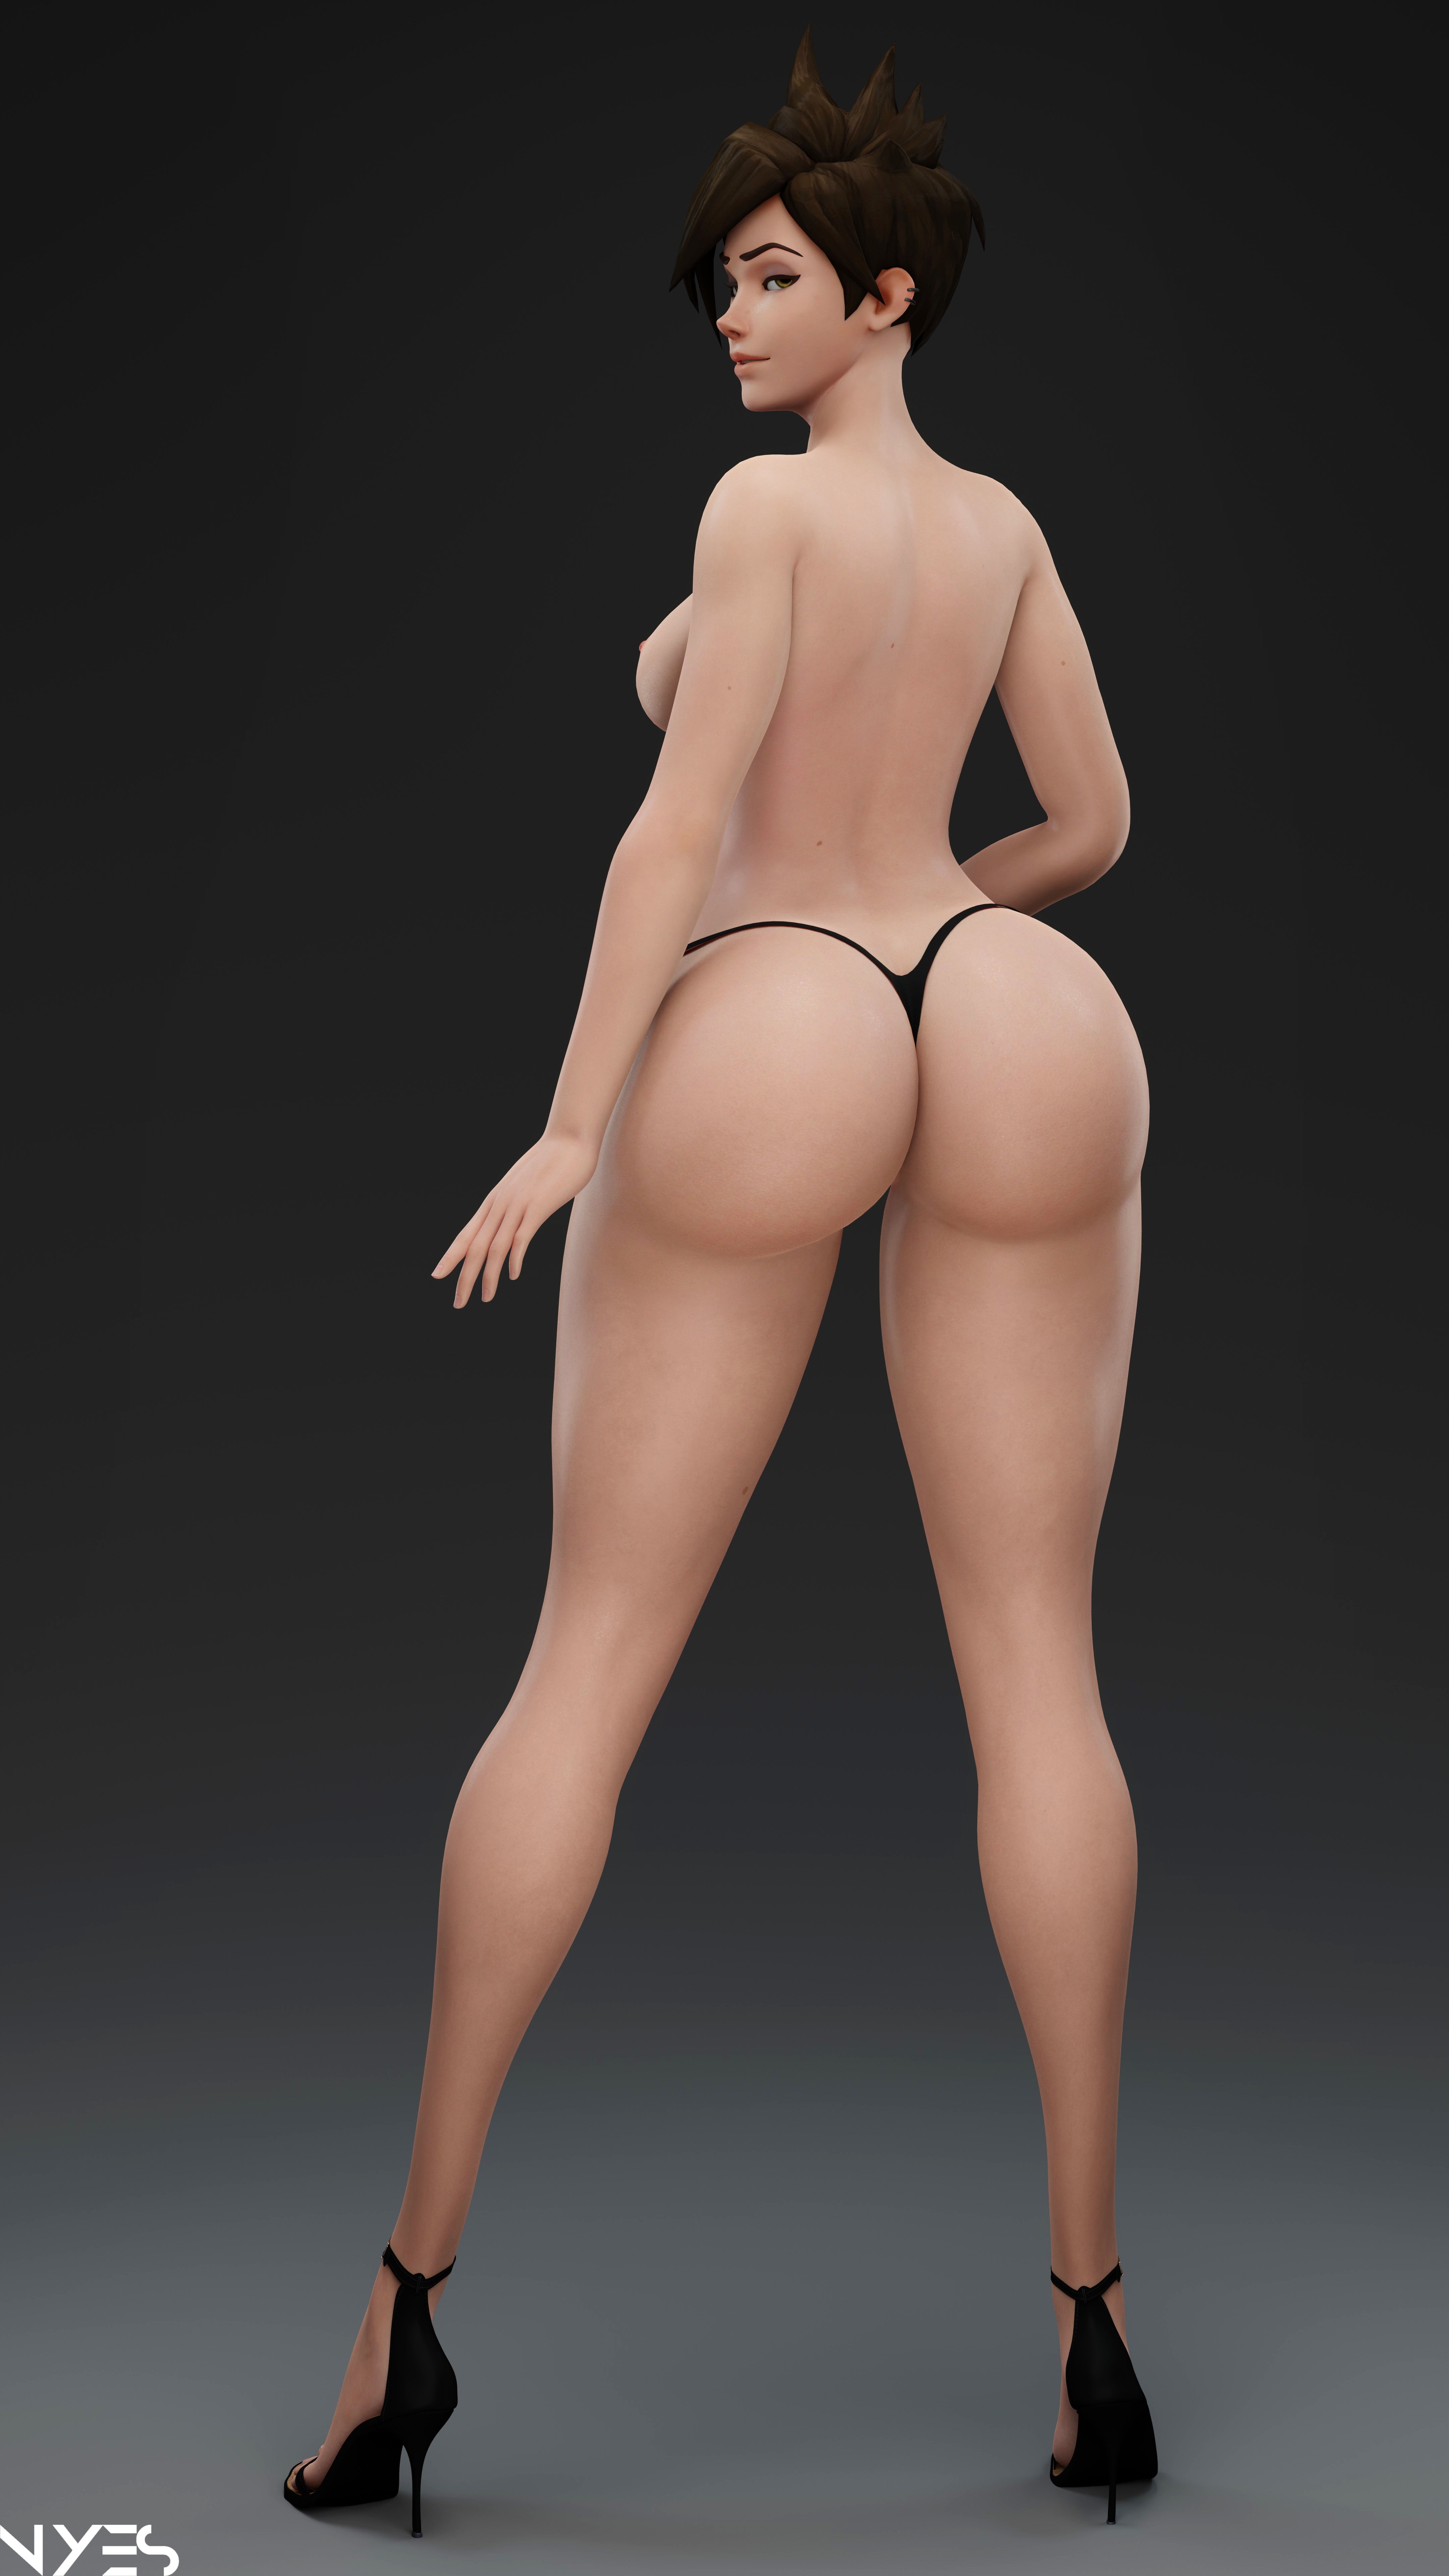 Tracer Tracer Overwatch Partially_clothed High Heels Ass Pinup